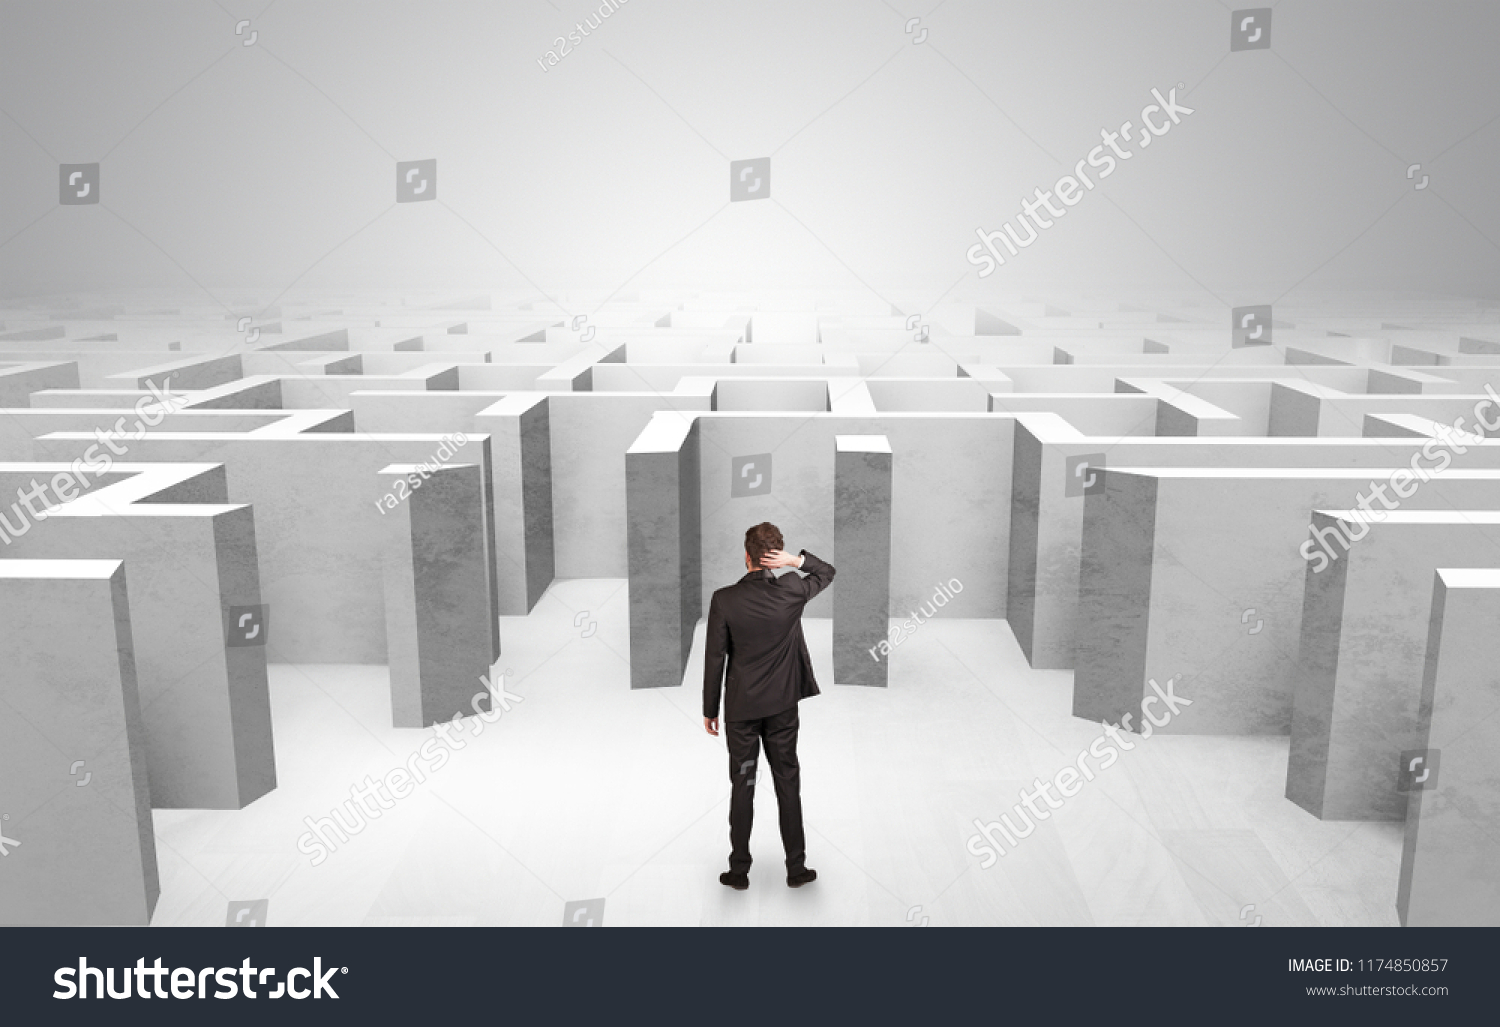 Businessman choosing between entrances in a middle of a maze #1174850857